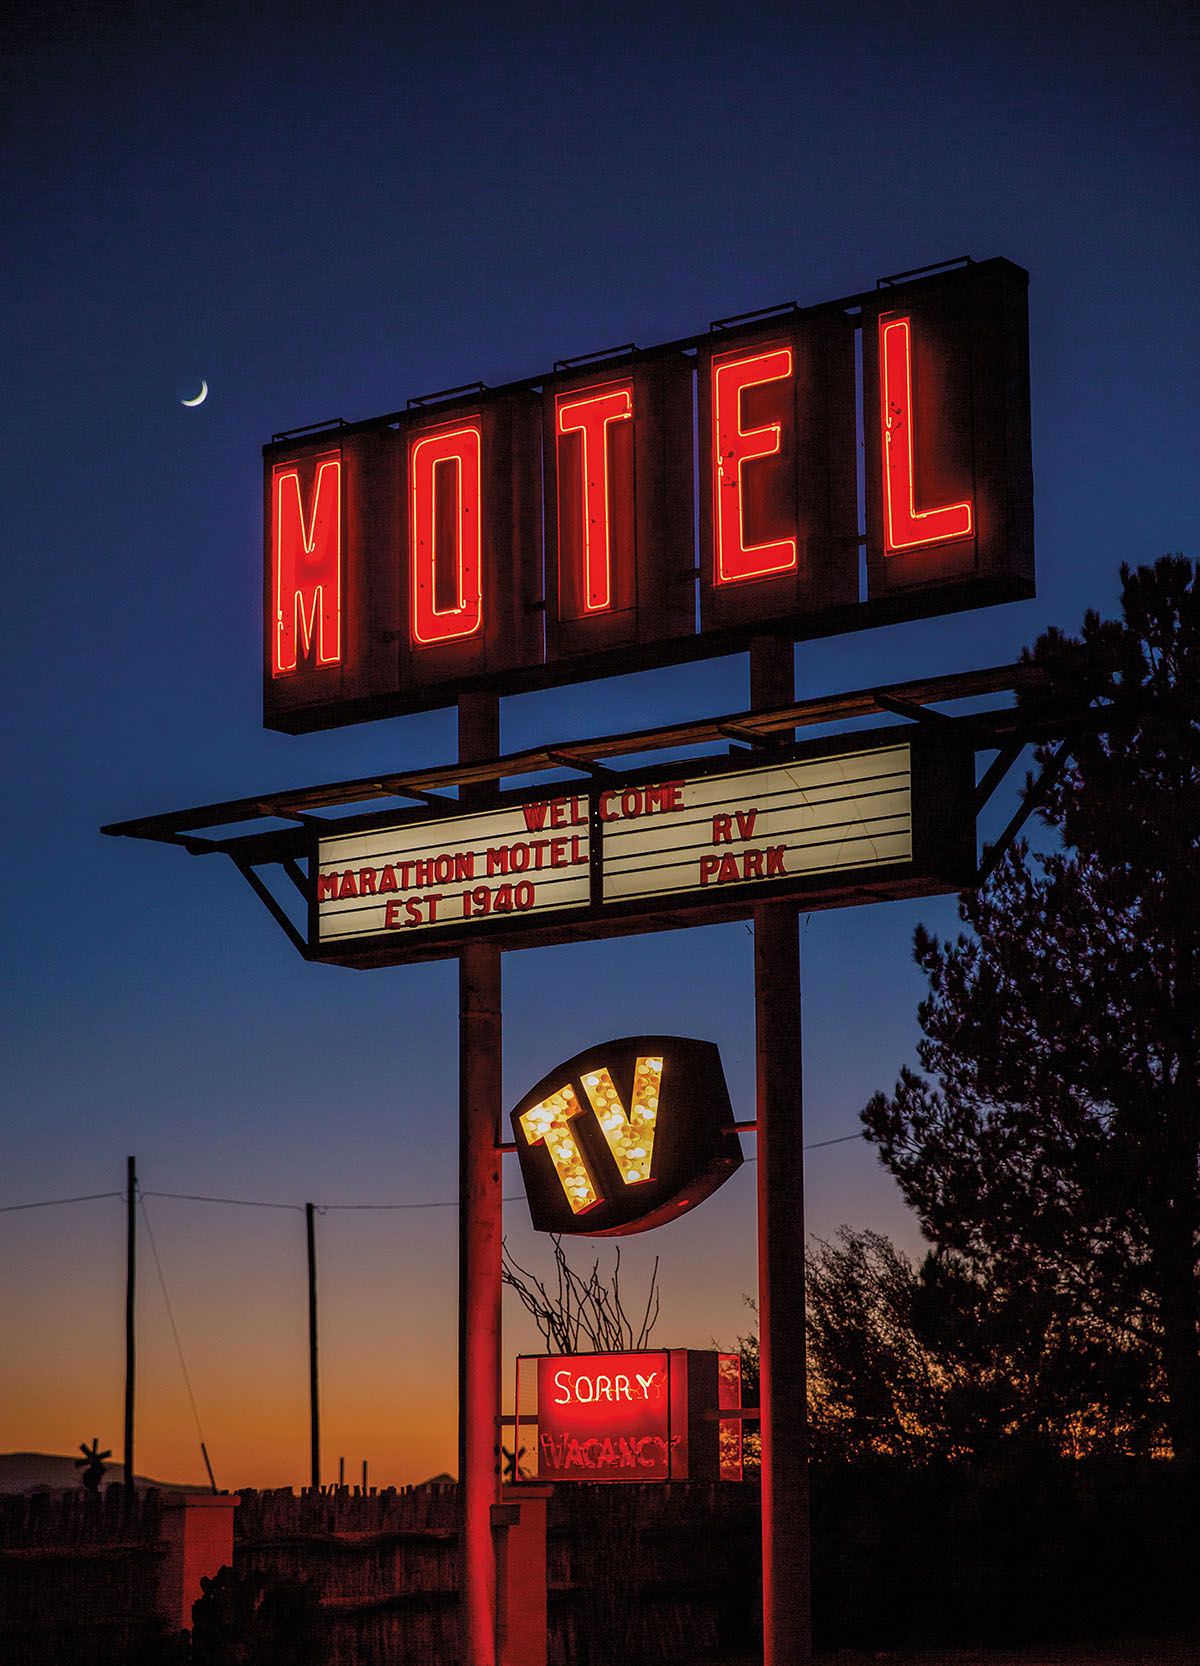 A tall neon red hotel sign reading "Motel" in front of a starry sky